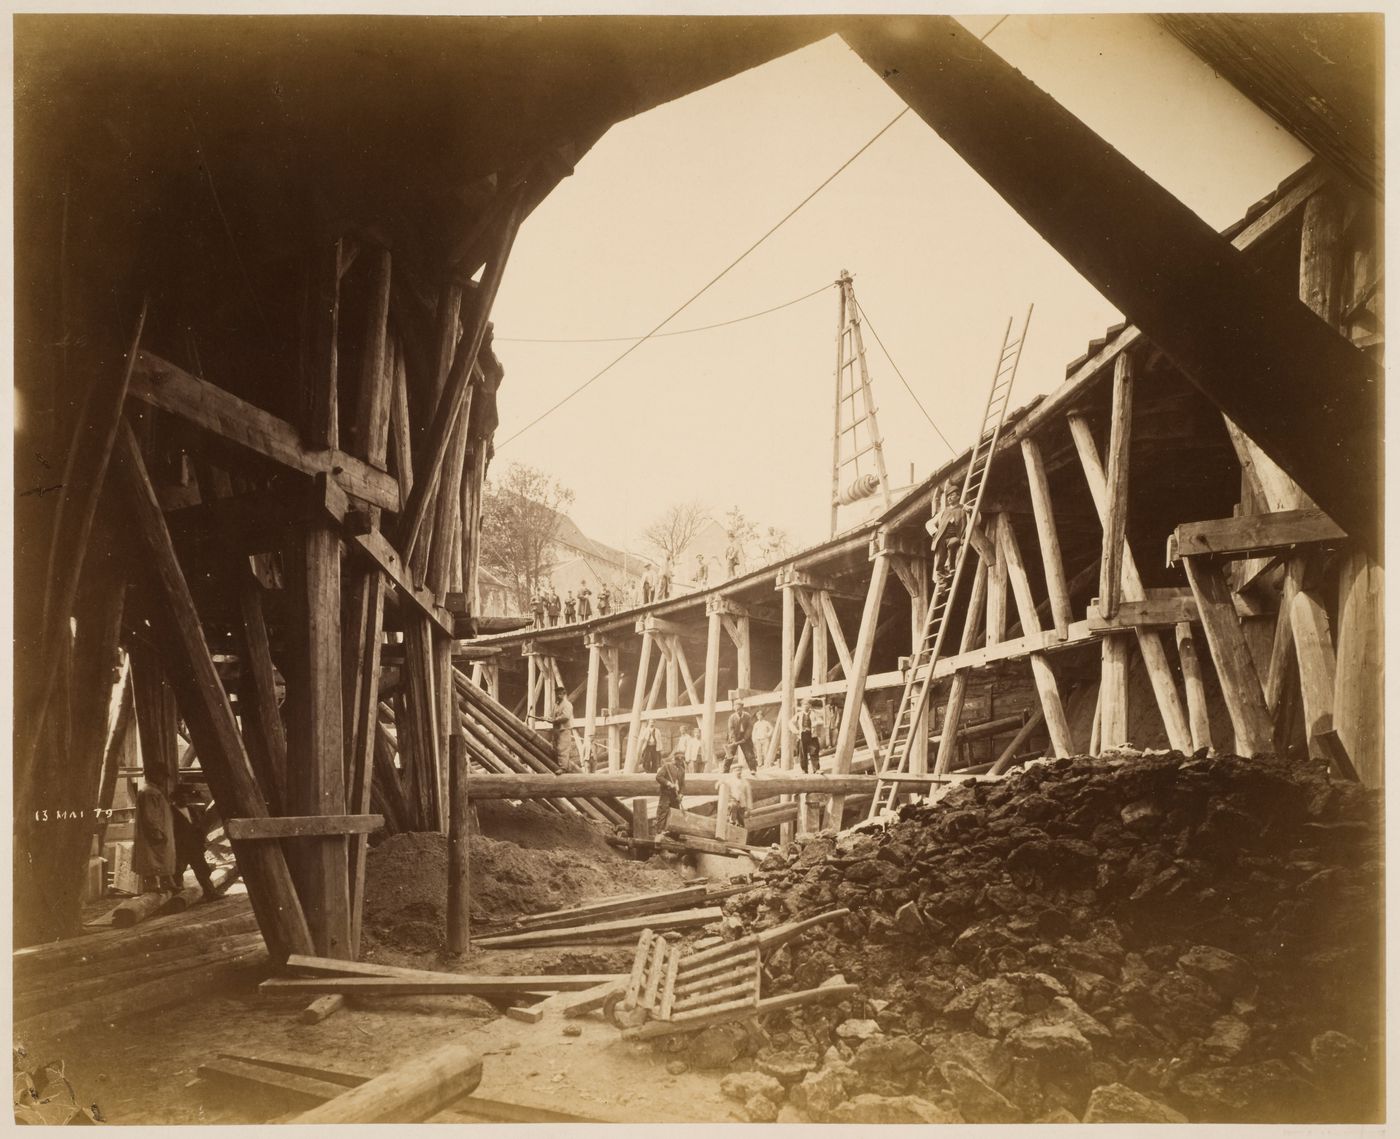 Workers amid Construction of Sacre Coeur